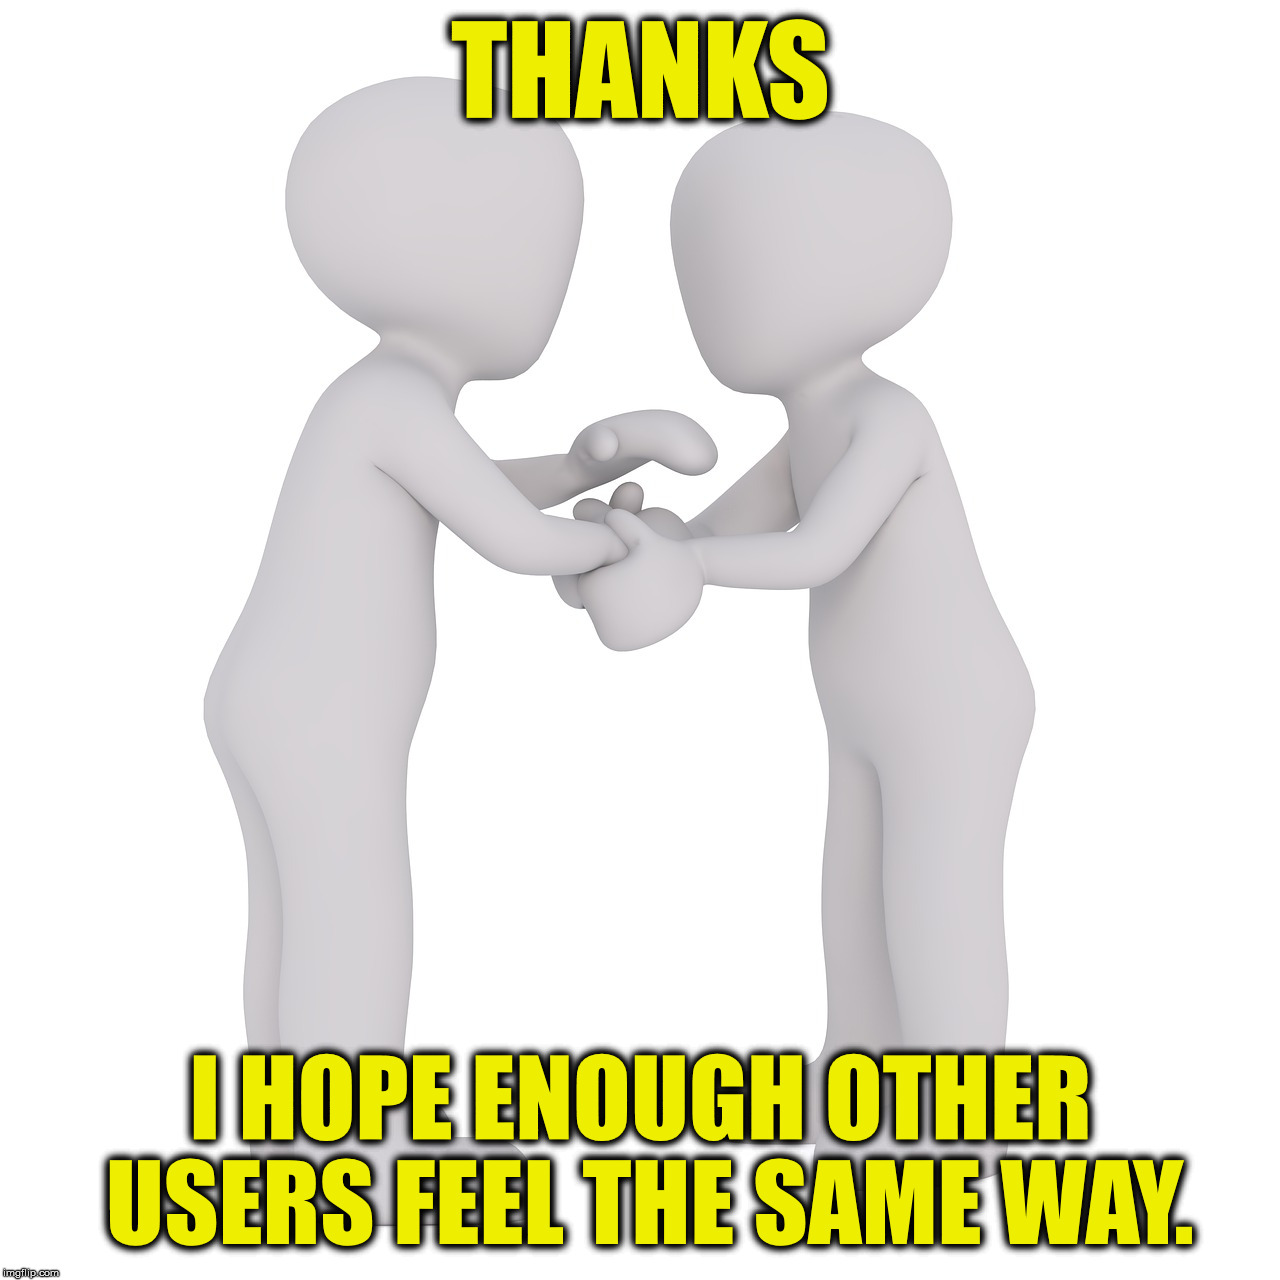 thank you | THANKS I HOPE ENOUGH OTHER USERS FEEL THE SAME WAY. | image tagged in thank you | made w/ Imgflip meme maker